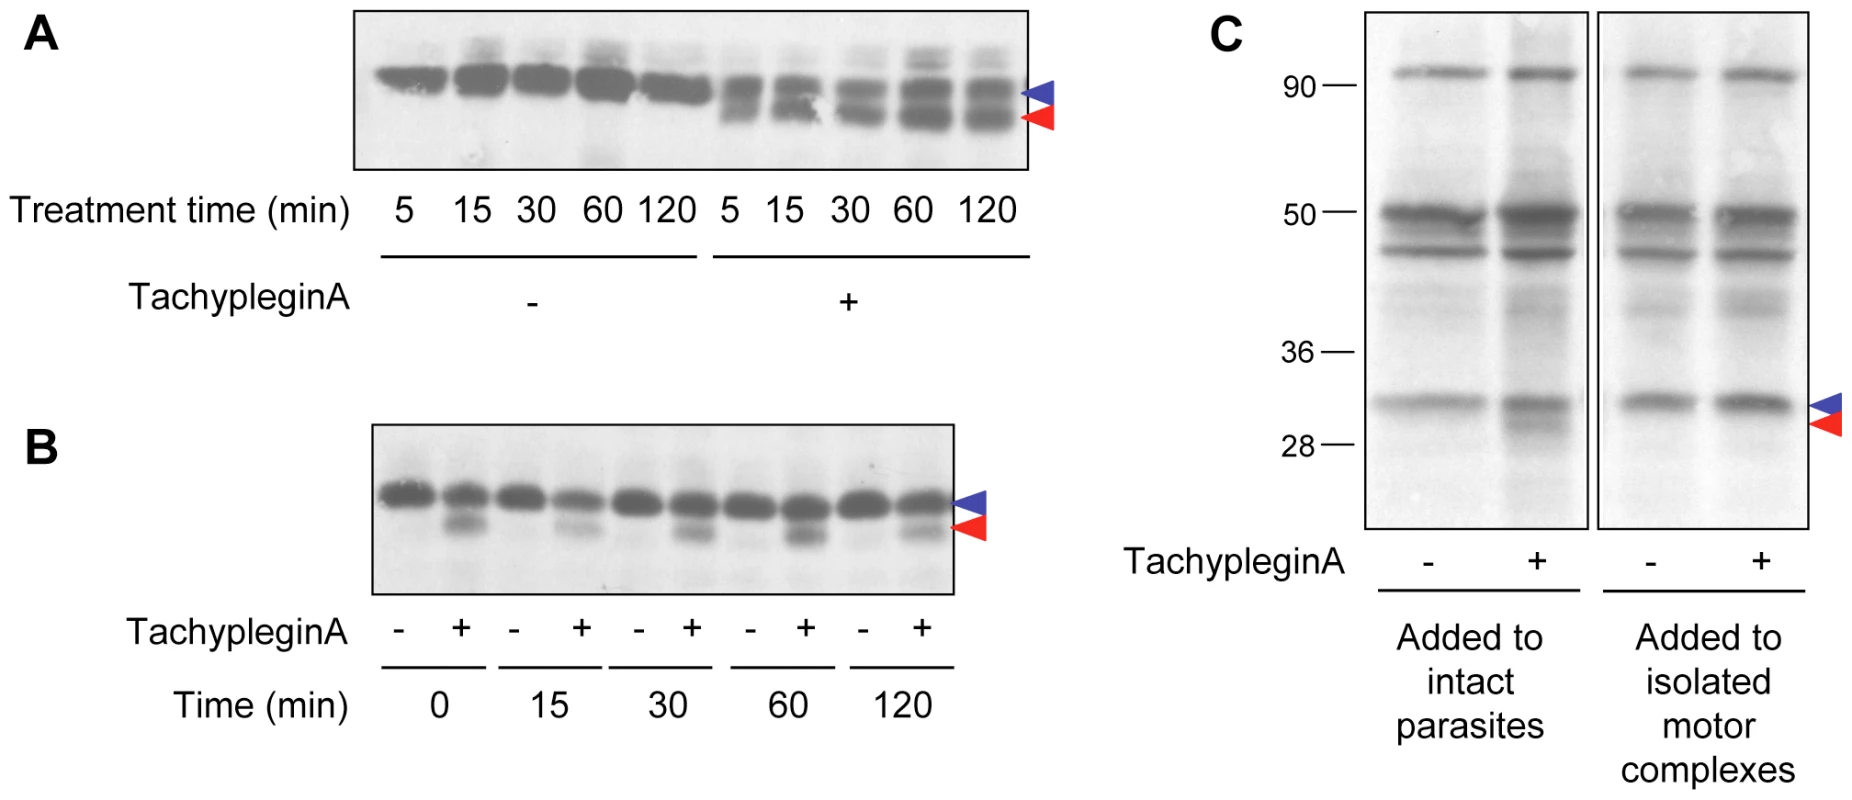 The effect of tachypleginA on TgMLC1 is rapid, irreversible and only occurs in intact parasites.